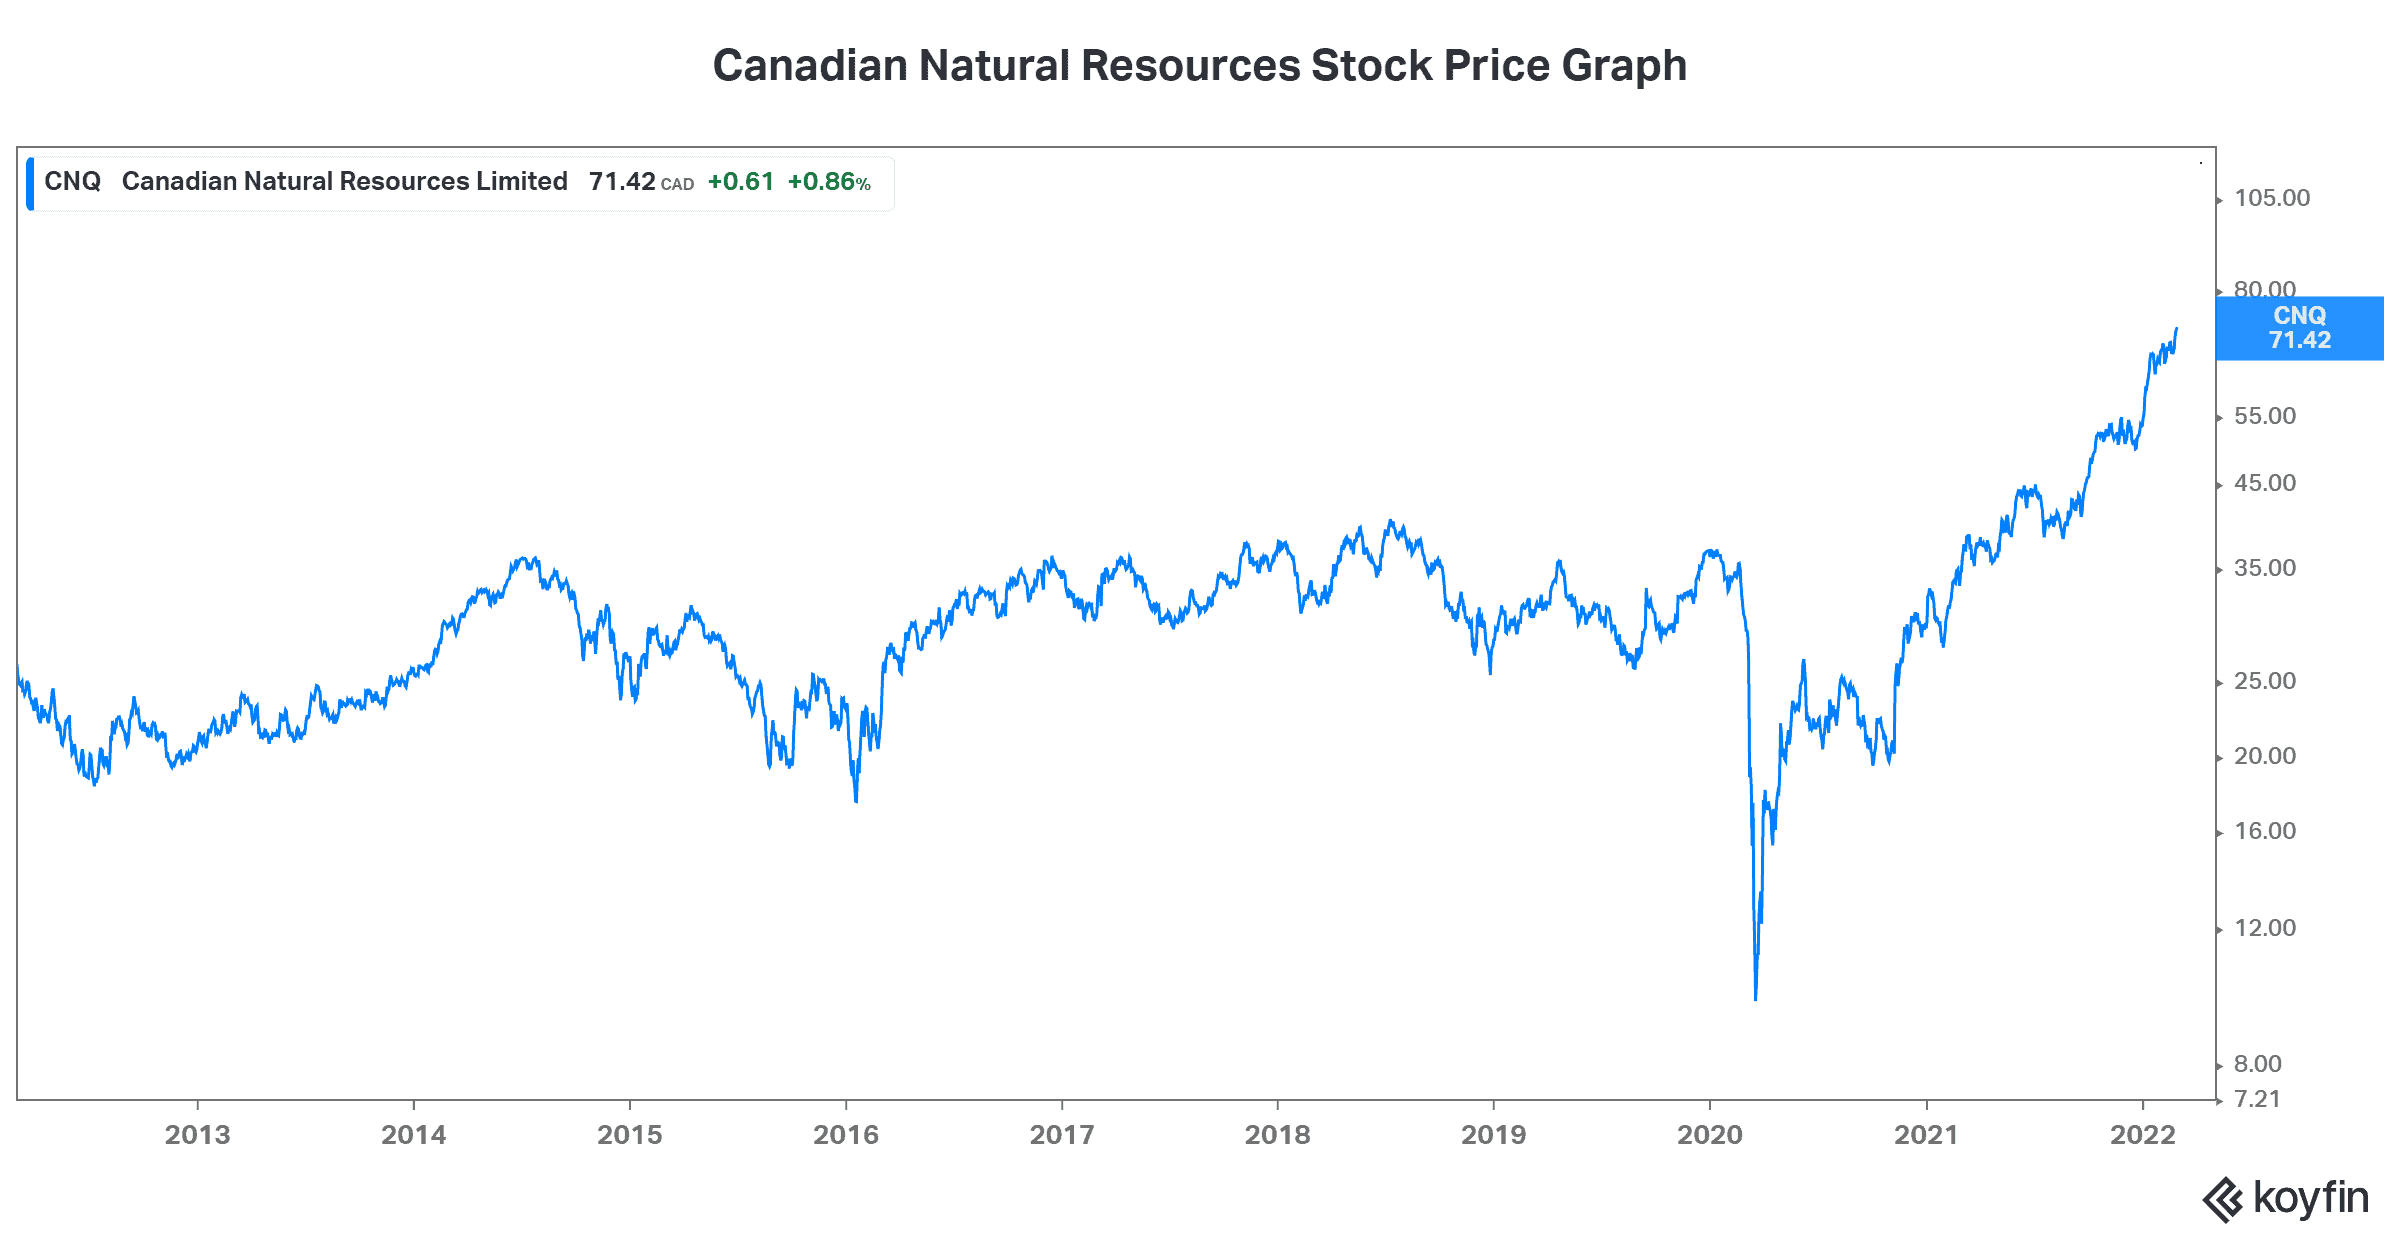 Energy stock Canadian Natural Resources crude oil prices